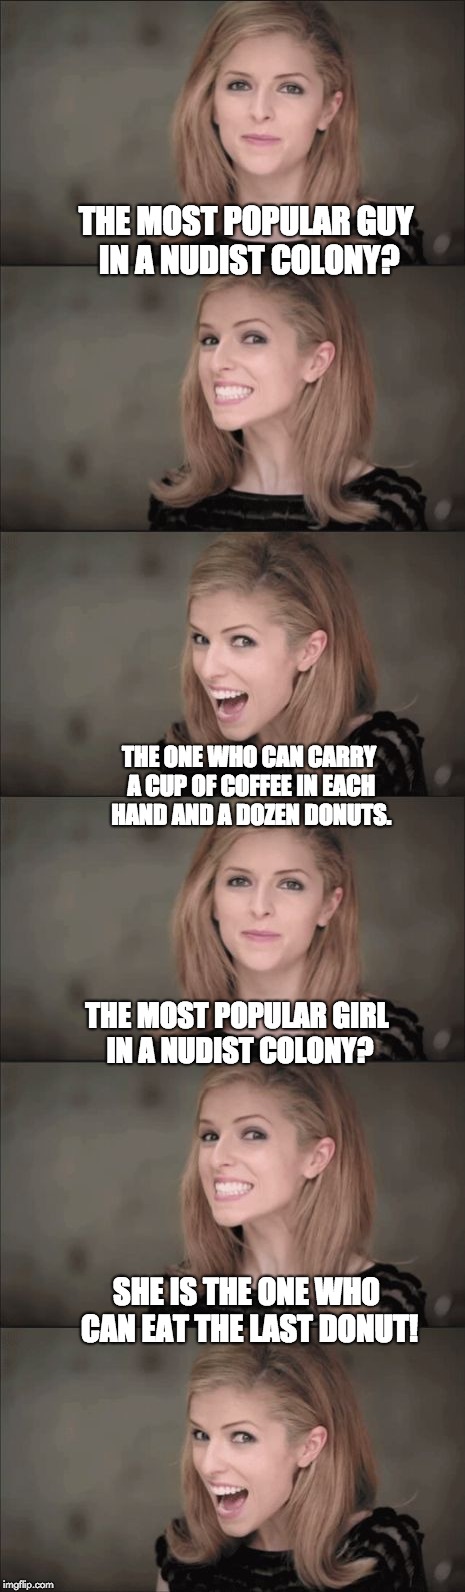 Nudist Jokes | THE MOST POPULAR GUY IN A NUDIST COLONY? THE ONE WHO CAN CARRY A CUP OF COFFEE IN EACH HAND AND A DOZEN DONUTS. THE MOST POPULAR GIRL IN A NUDIST COLONY? SHE IS THE ONE WHO CAN EAT THE LAST DONUT! | image tagged in anna kendrick | made w/ Imgflip meme maker